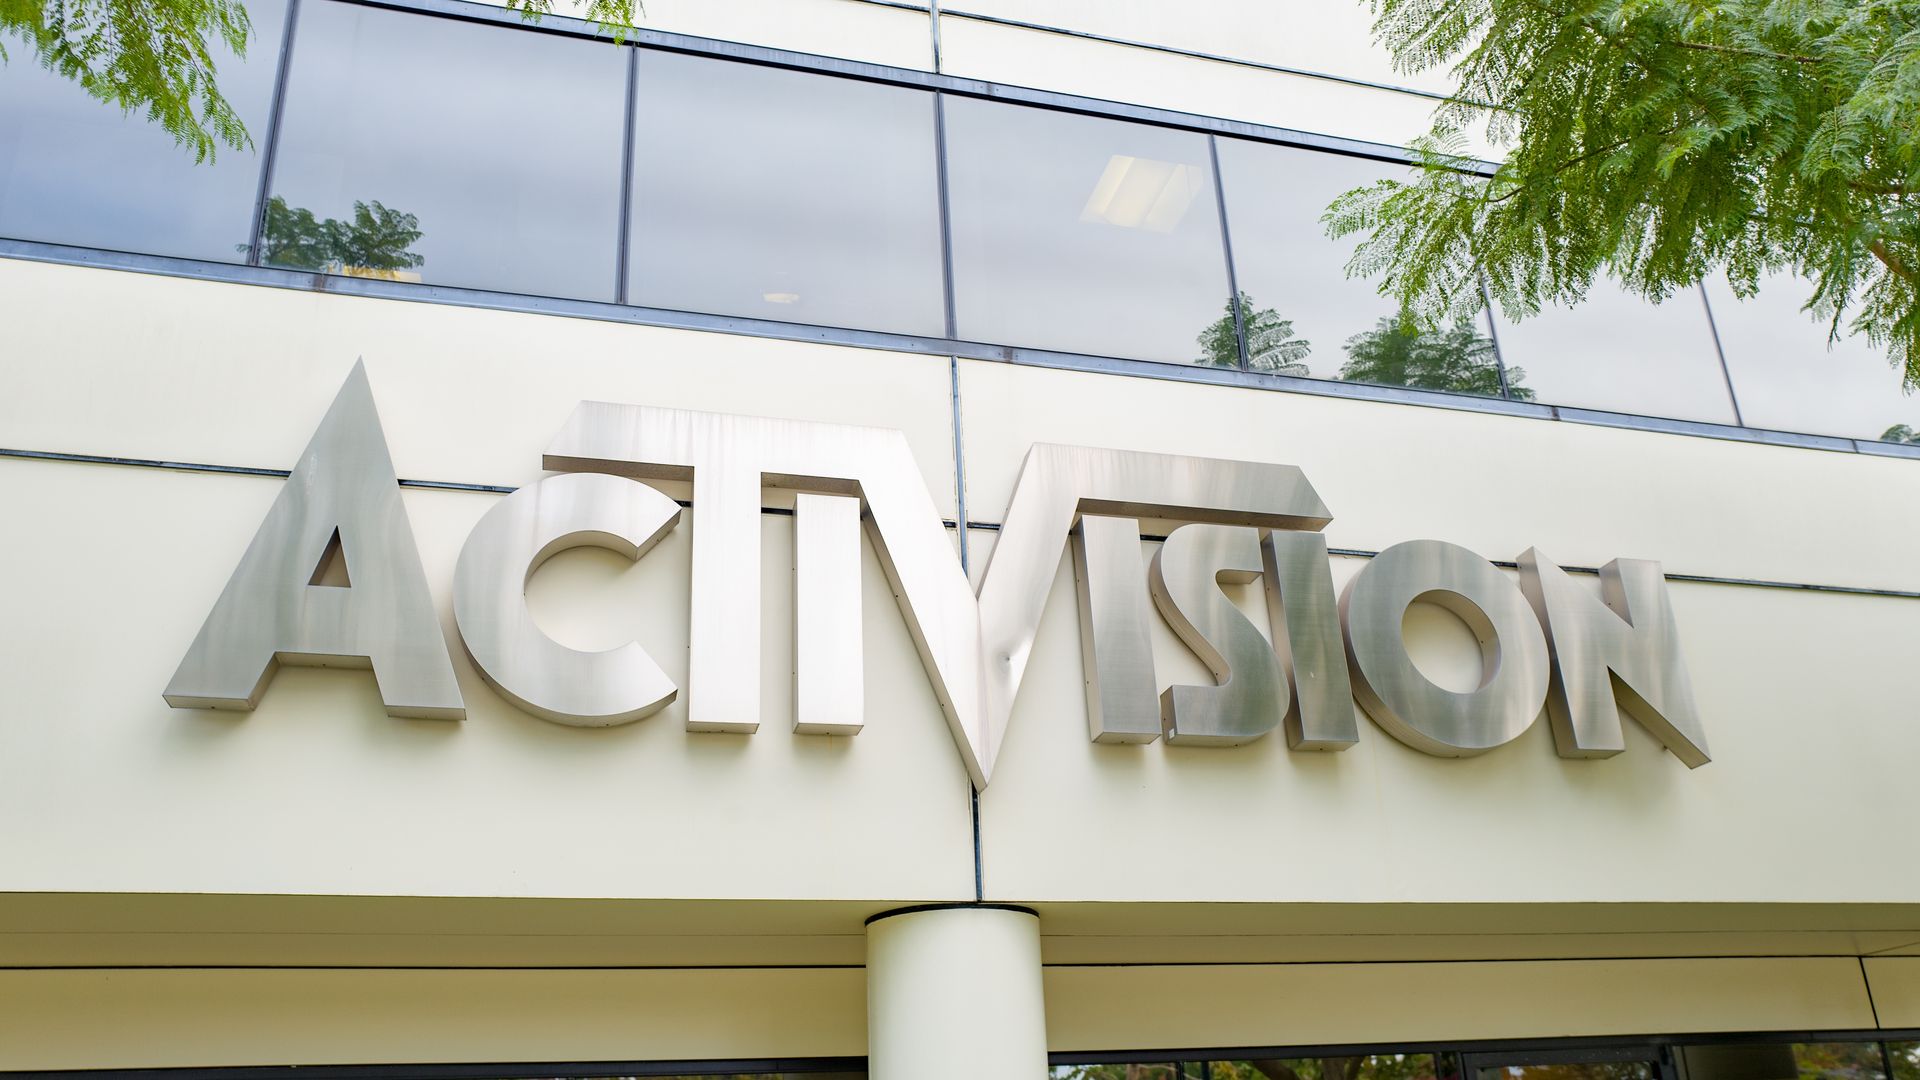 ActiVision building